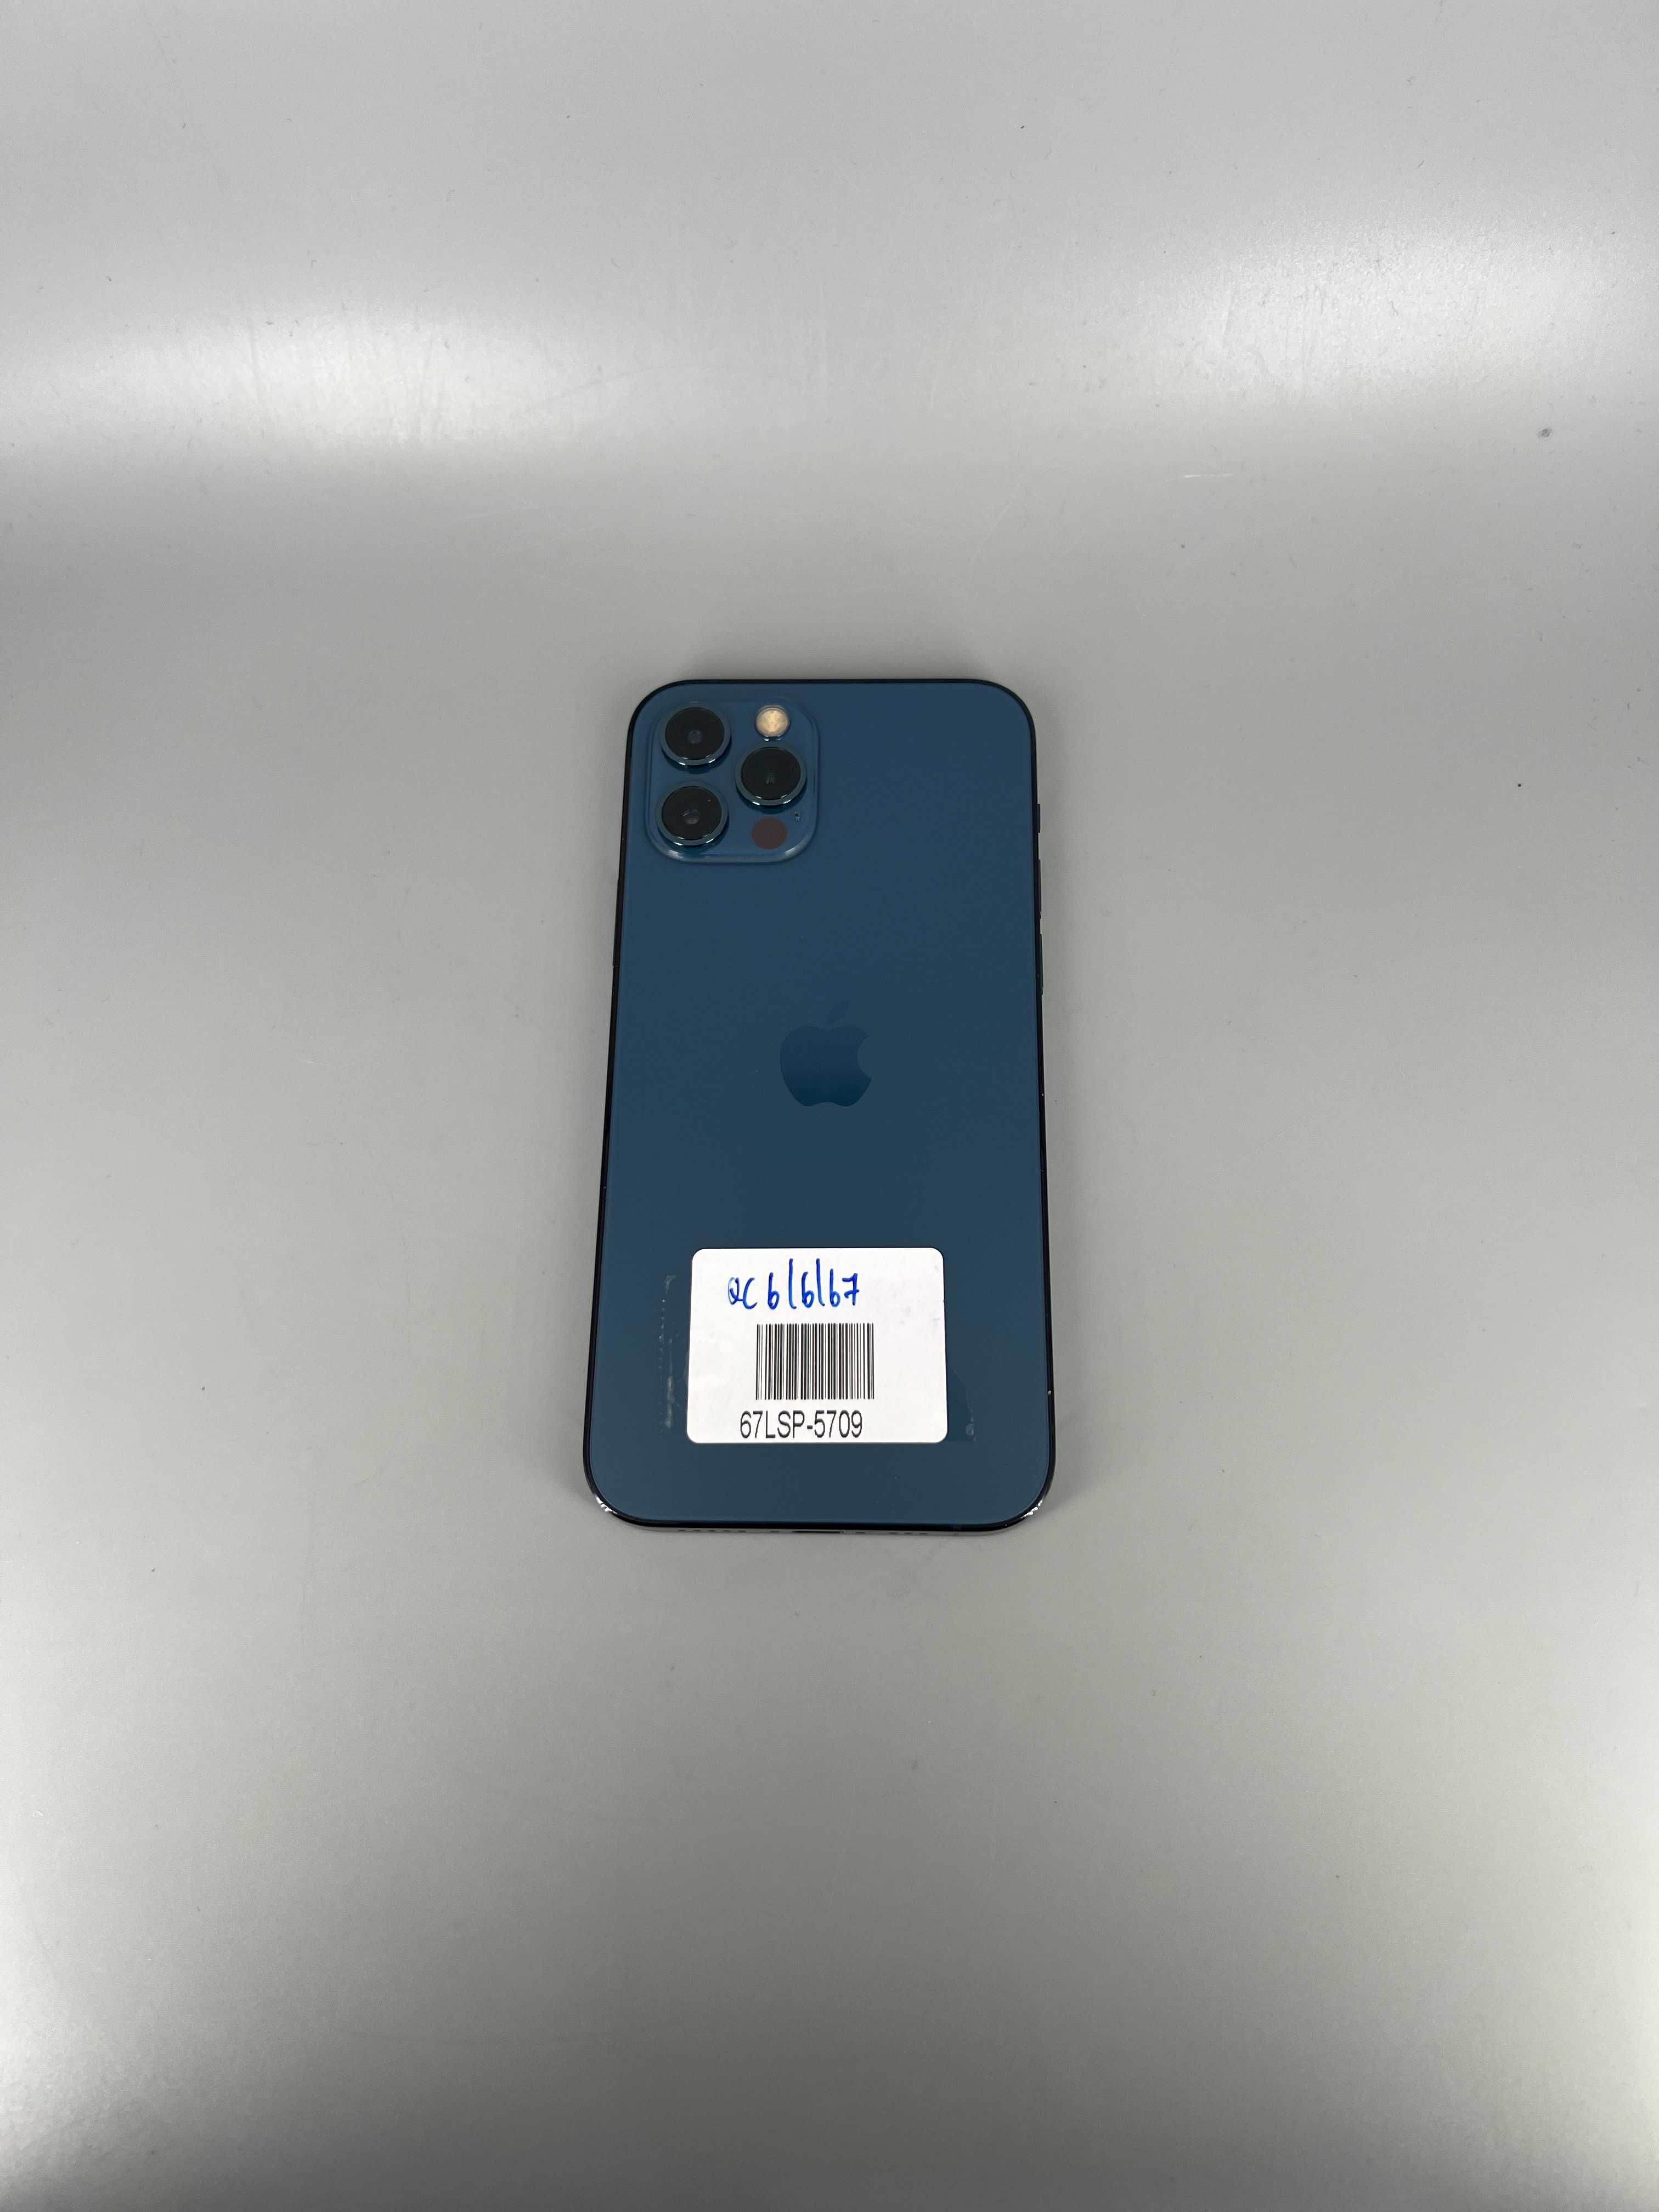 Used iPhone 12 Pro 128GB Pacific Blue 67LSP-5709